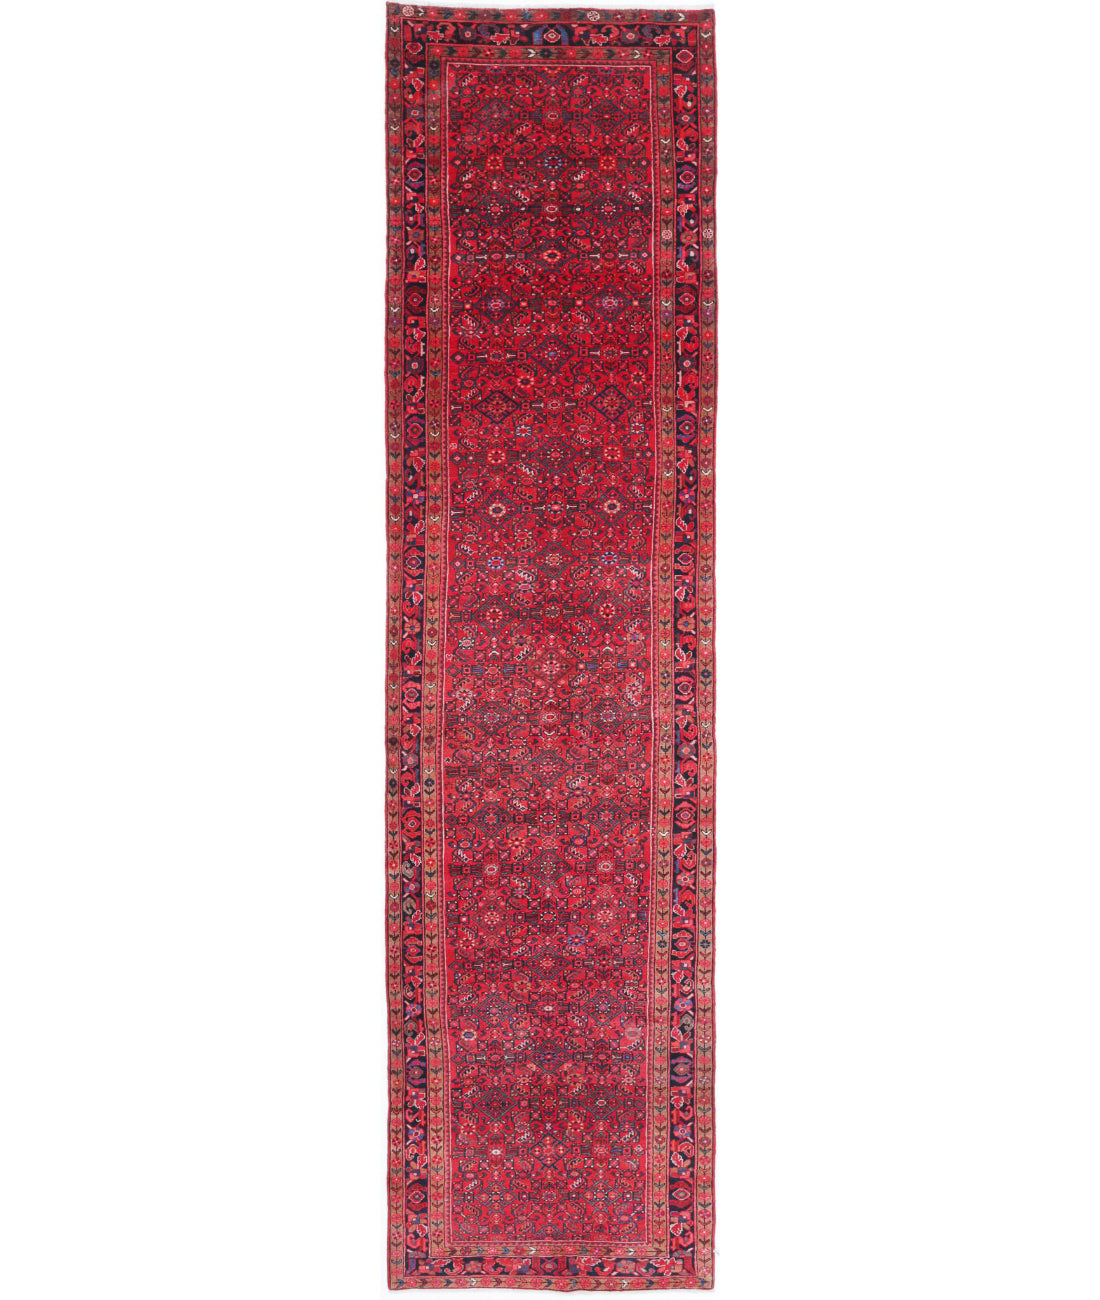 Hand Knotted Persian Hamadan Wool Rug - 3&#39;10&#39;&#39; x 17&#39;0&#39;&#39; 3&#39;10&#39;&#39; x 17&#39;0&#39;&#39; (115 X 510) / Red / Black